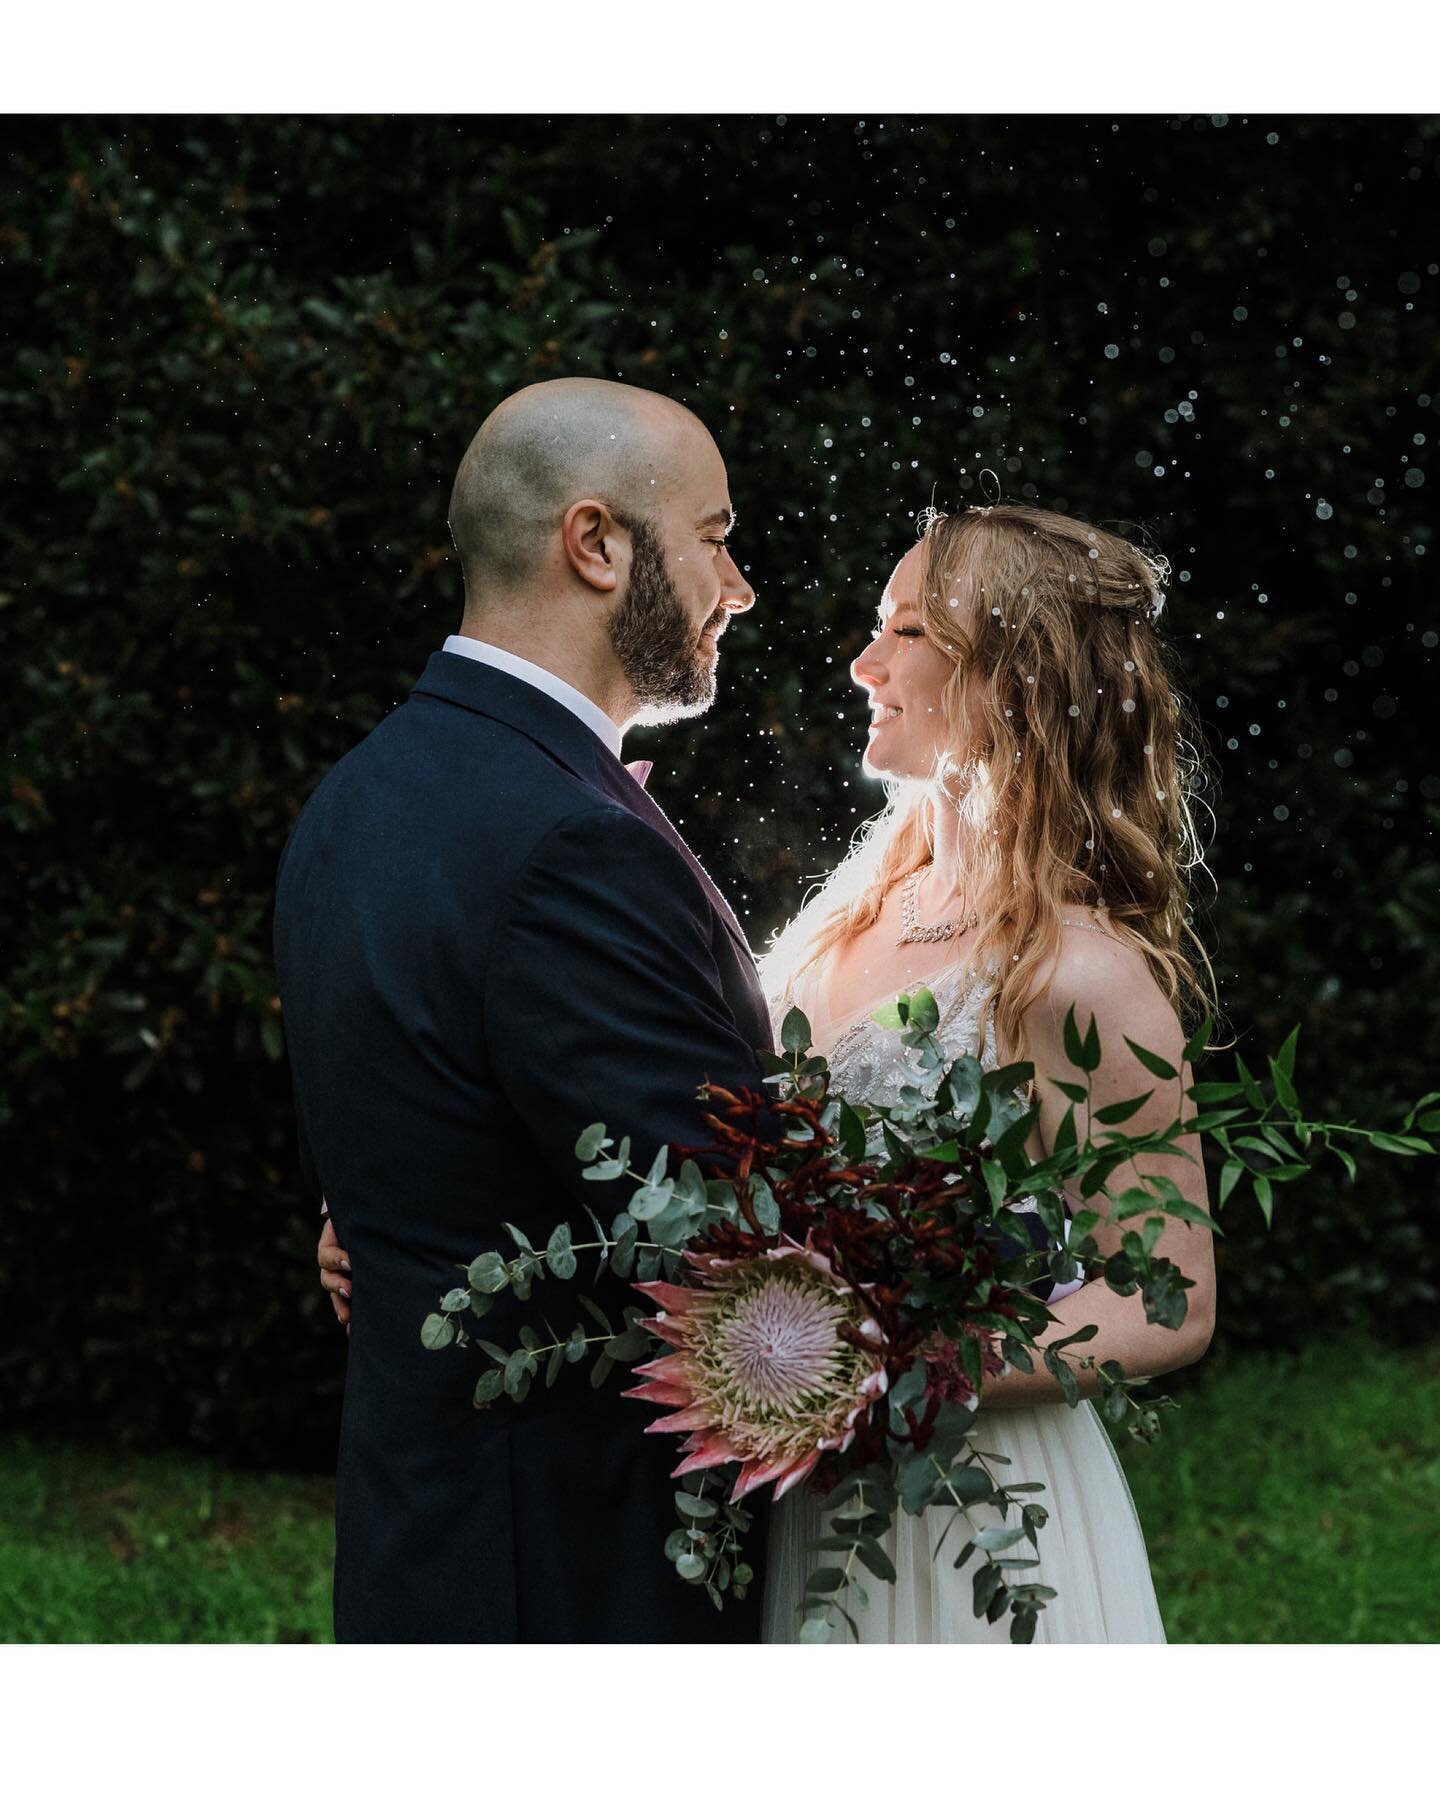 Never let rain ruin your wedding day. You can still dance in the magic of it, and we&rsquo;ll be right there with you making the raindrops sparkle. 💃🏼🌧 Congrats again Lauren &amp; Jak! Can&rsquo;t wait to share more of your special day. x
.
.
.
.
